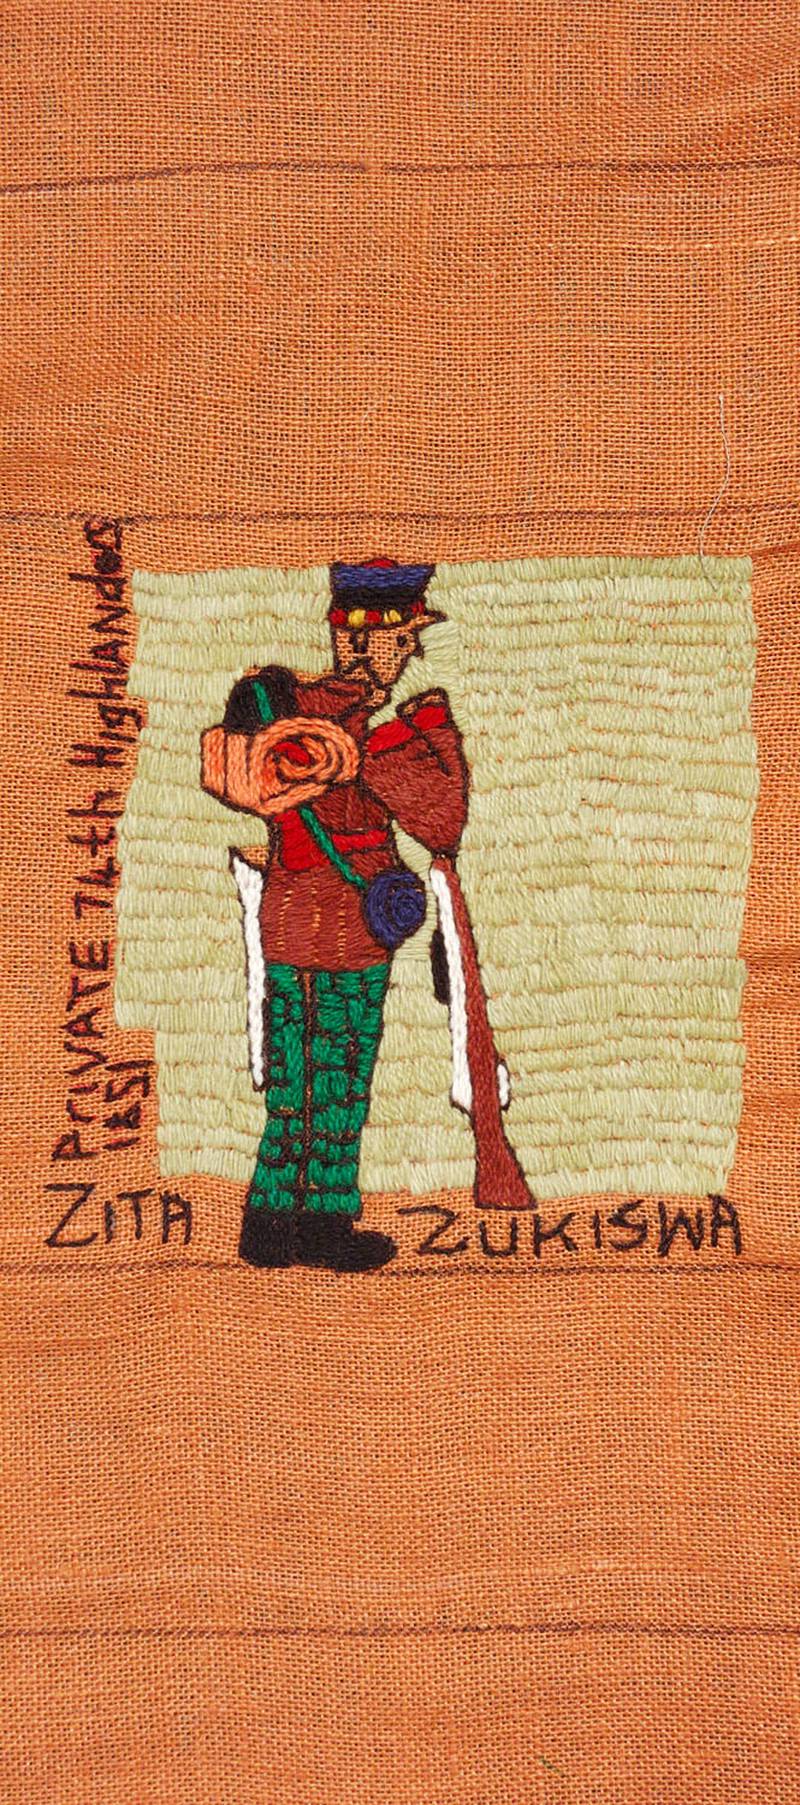 Made by Zita Zukiswa, this detail shows a soldier from the 74th Highlanders, in 1851.